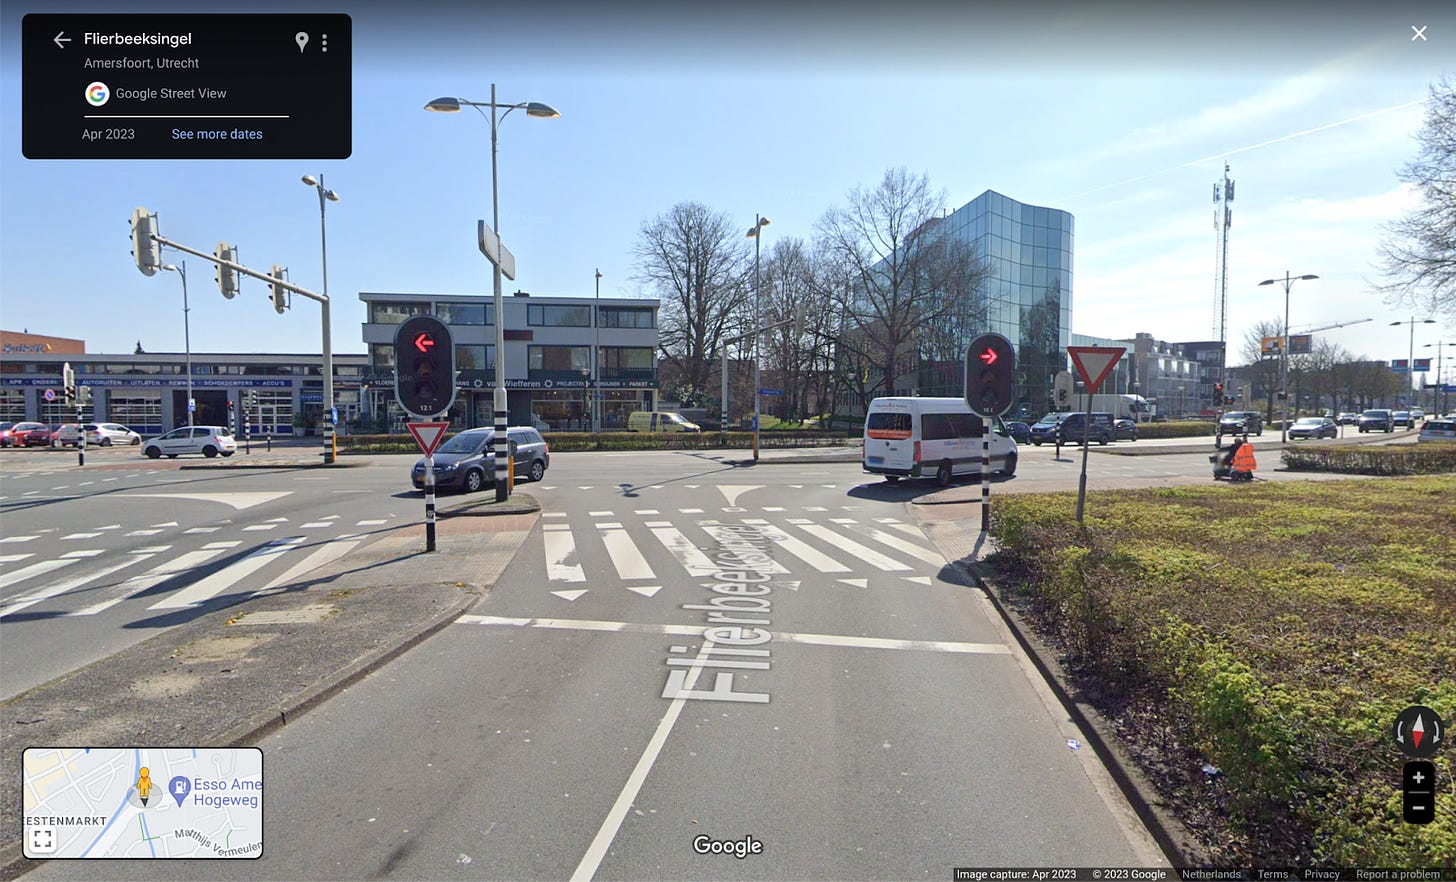 A streetview image of an intersection in the Netherlands, the perspective is in an approach lane about 20 meters back from the stopping line looking towards the intersection.